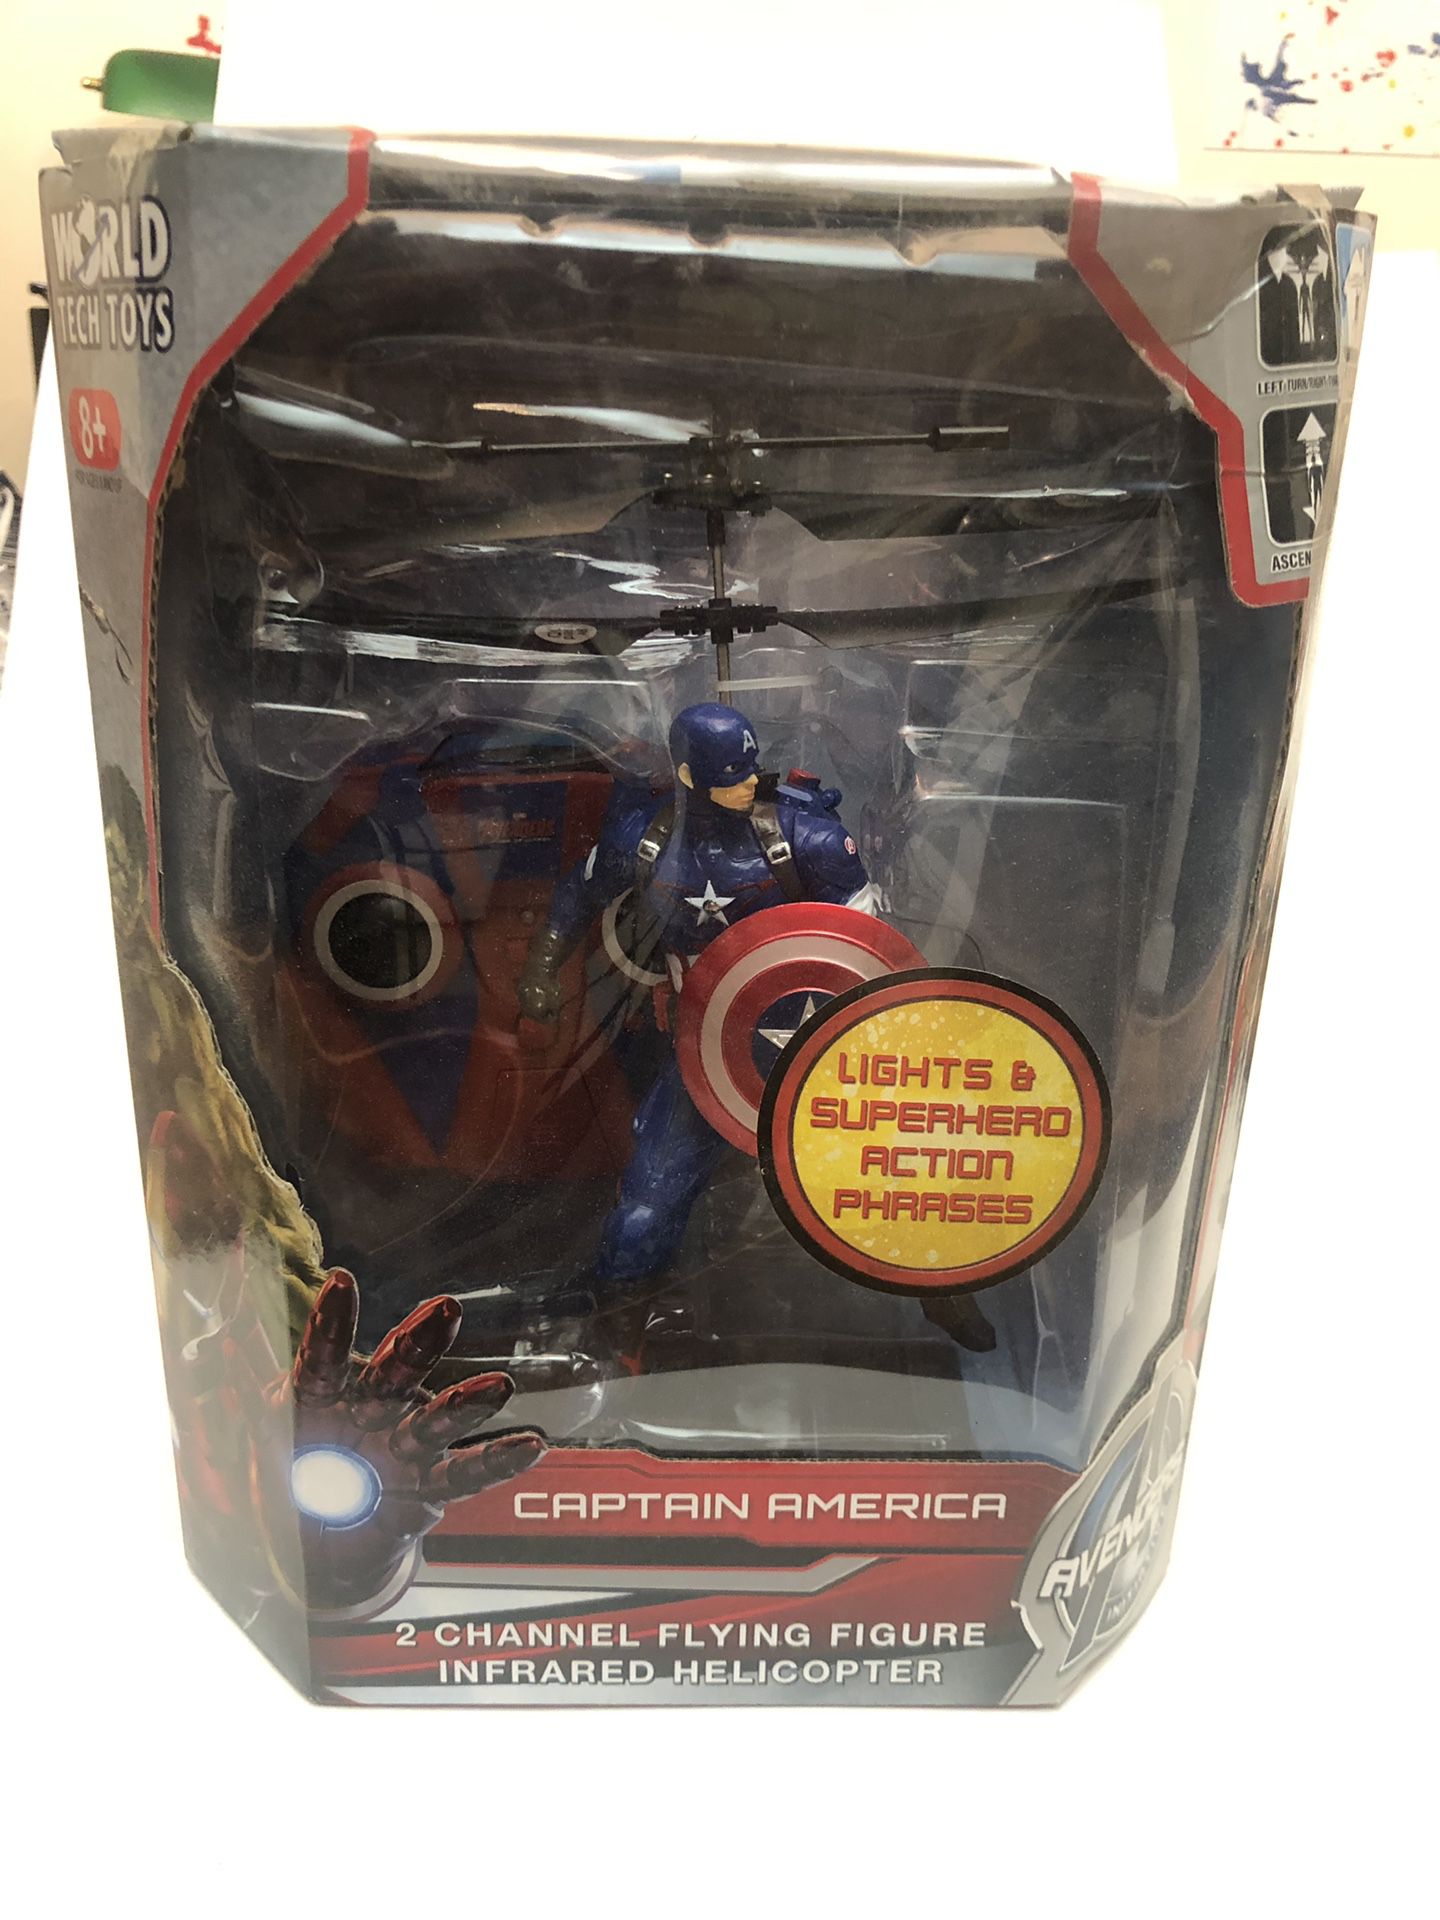 World Tech Toys Marvel Captain America 2 Channel Figure Infrared Helicopter